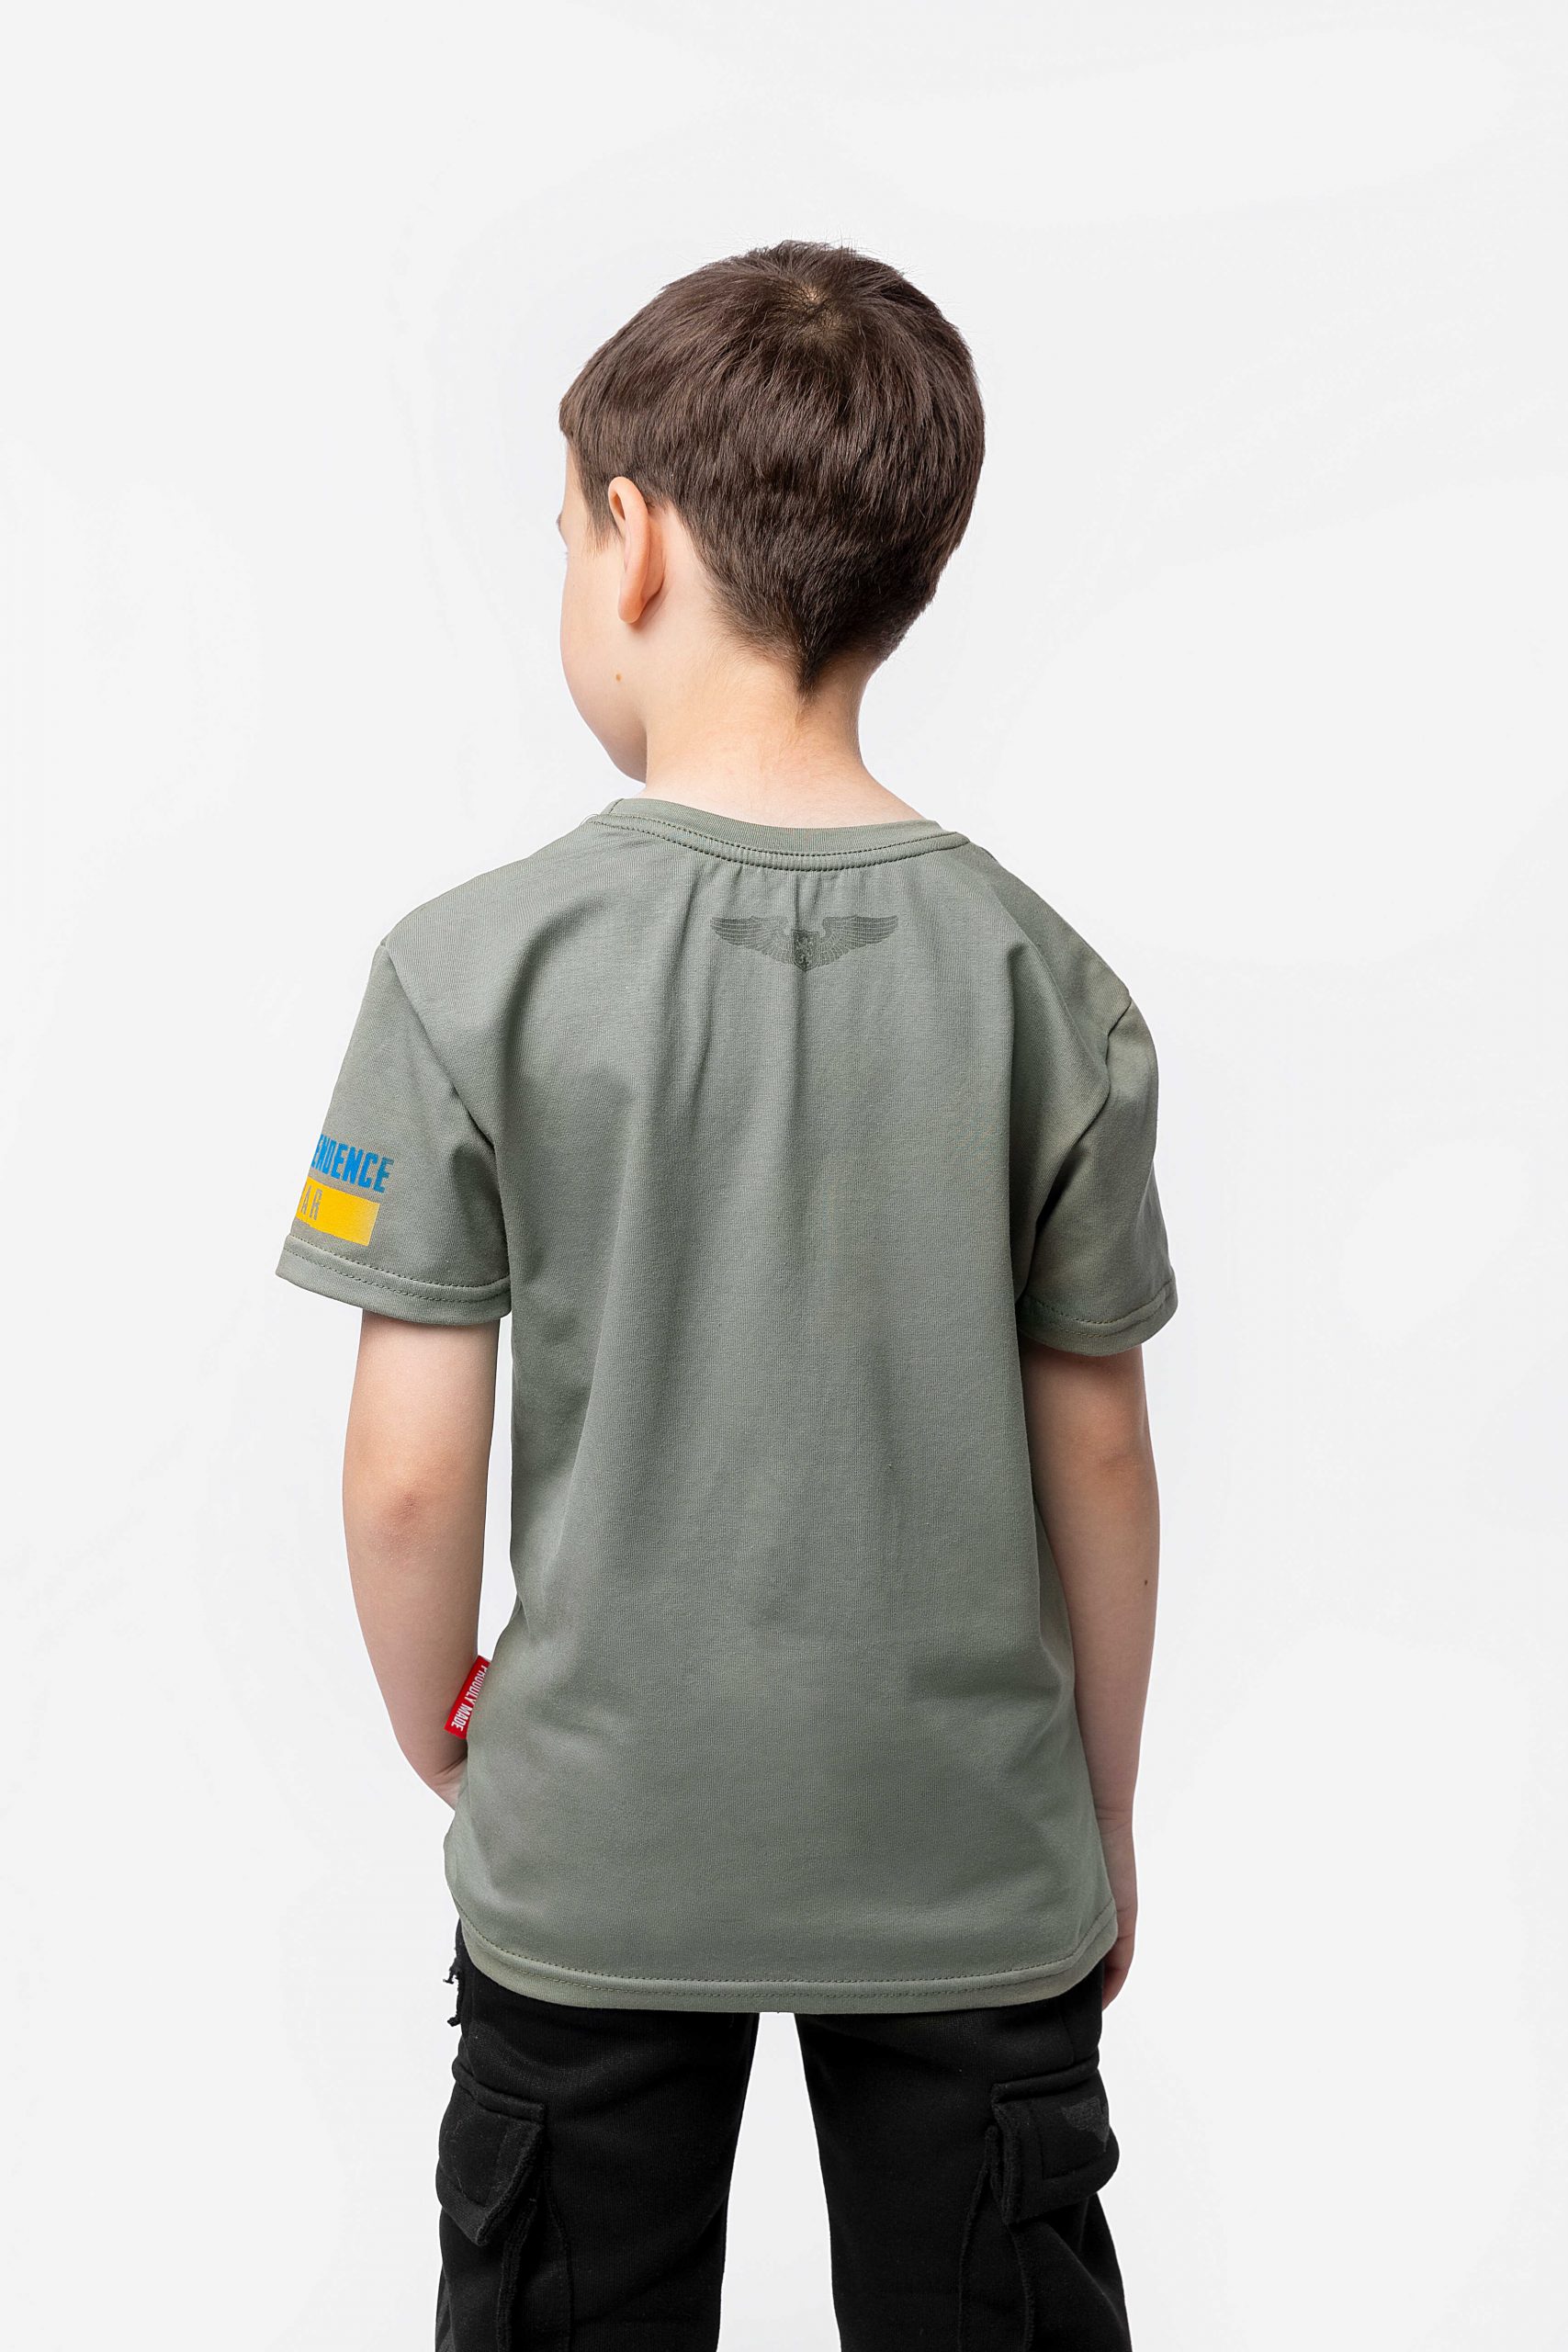 Kids T-Shirt We Are From Ukraine.h. Color khaki. 3.